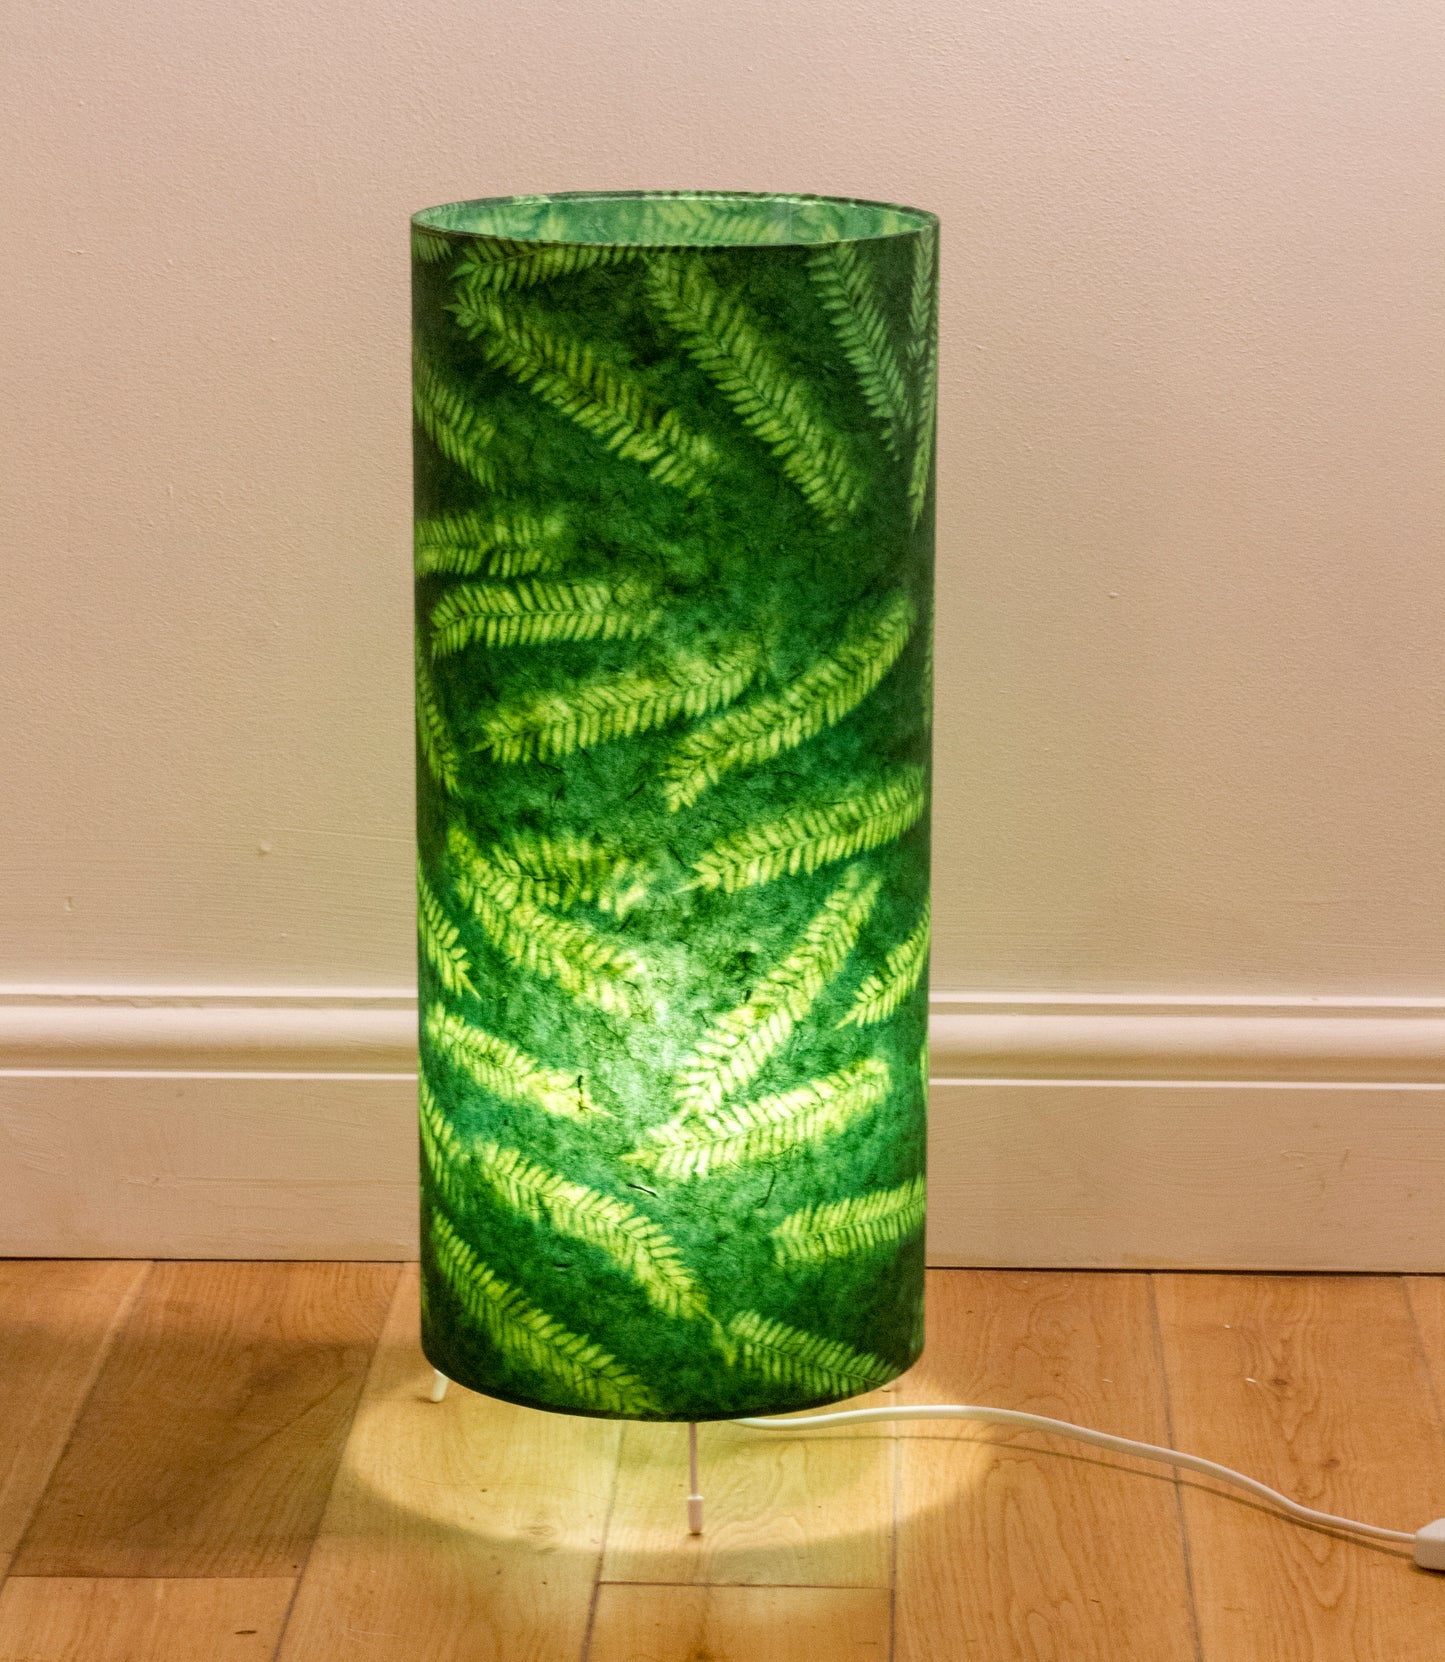 Drum Lamp Shade - P27 - Resistance Dyed Green Fern, 70cm(d) x 30cm(h)